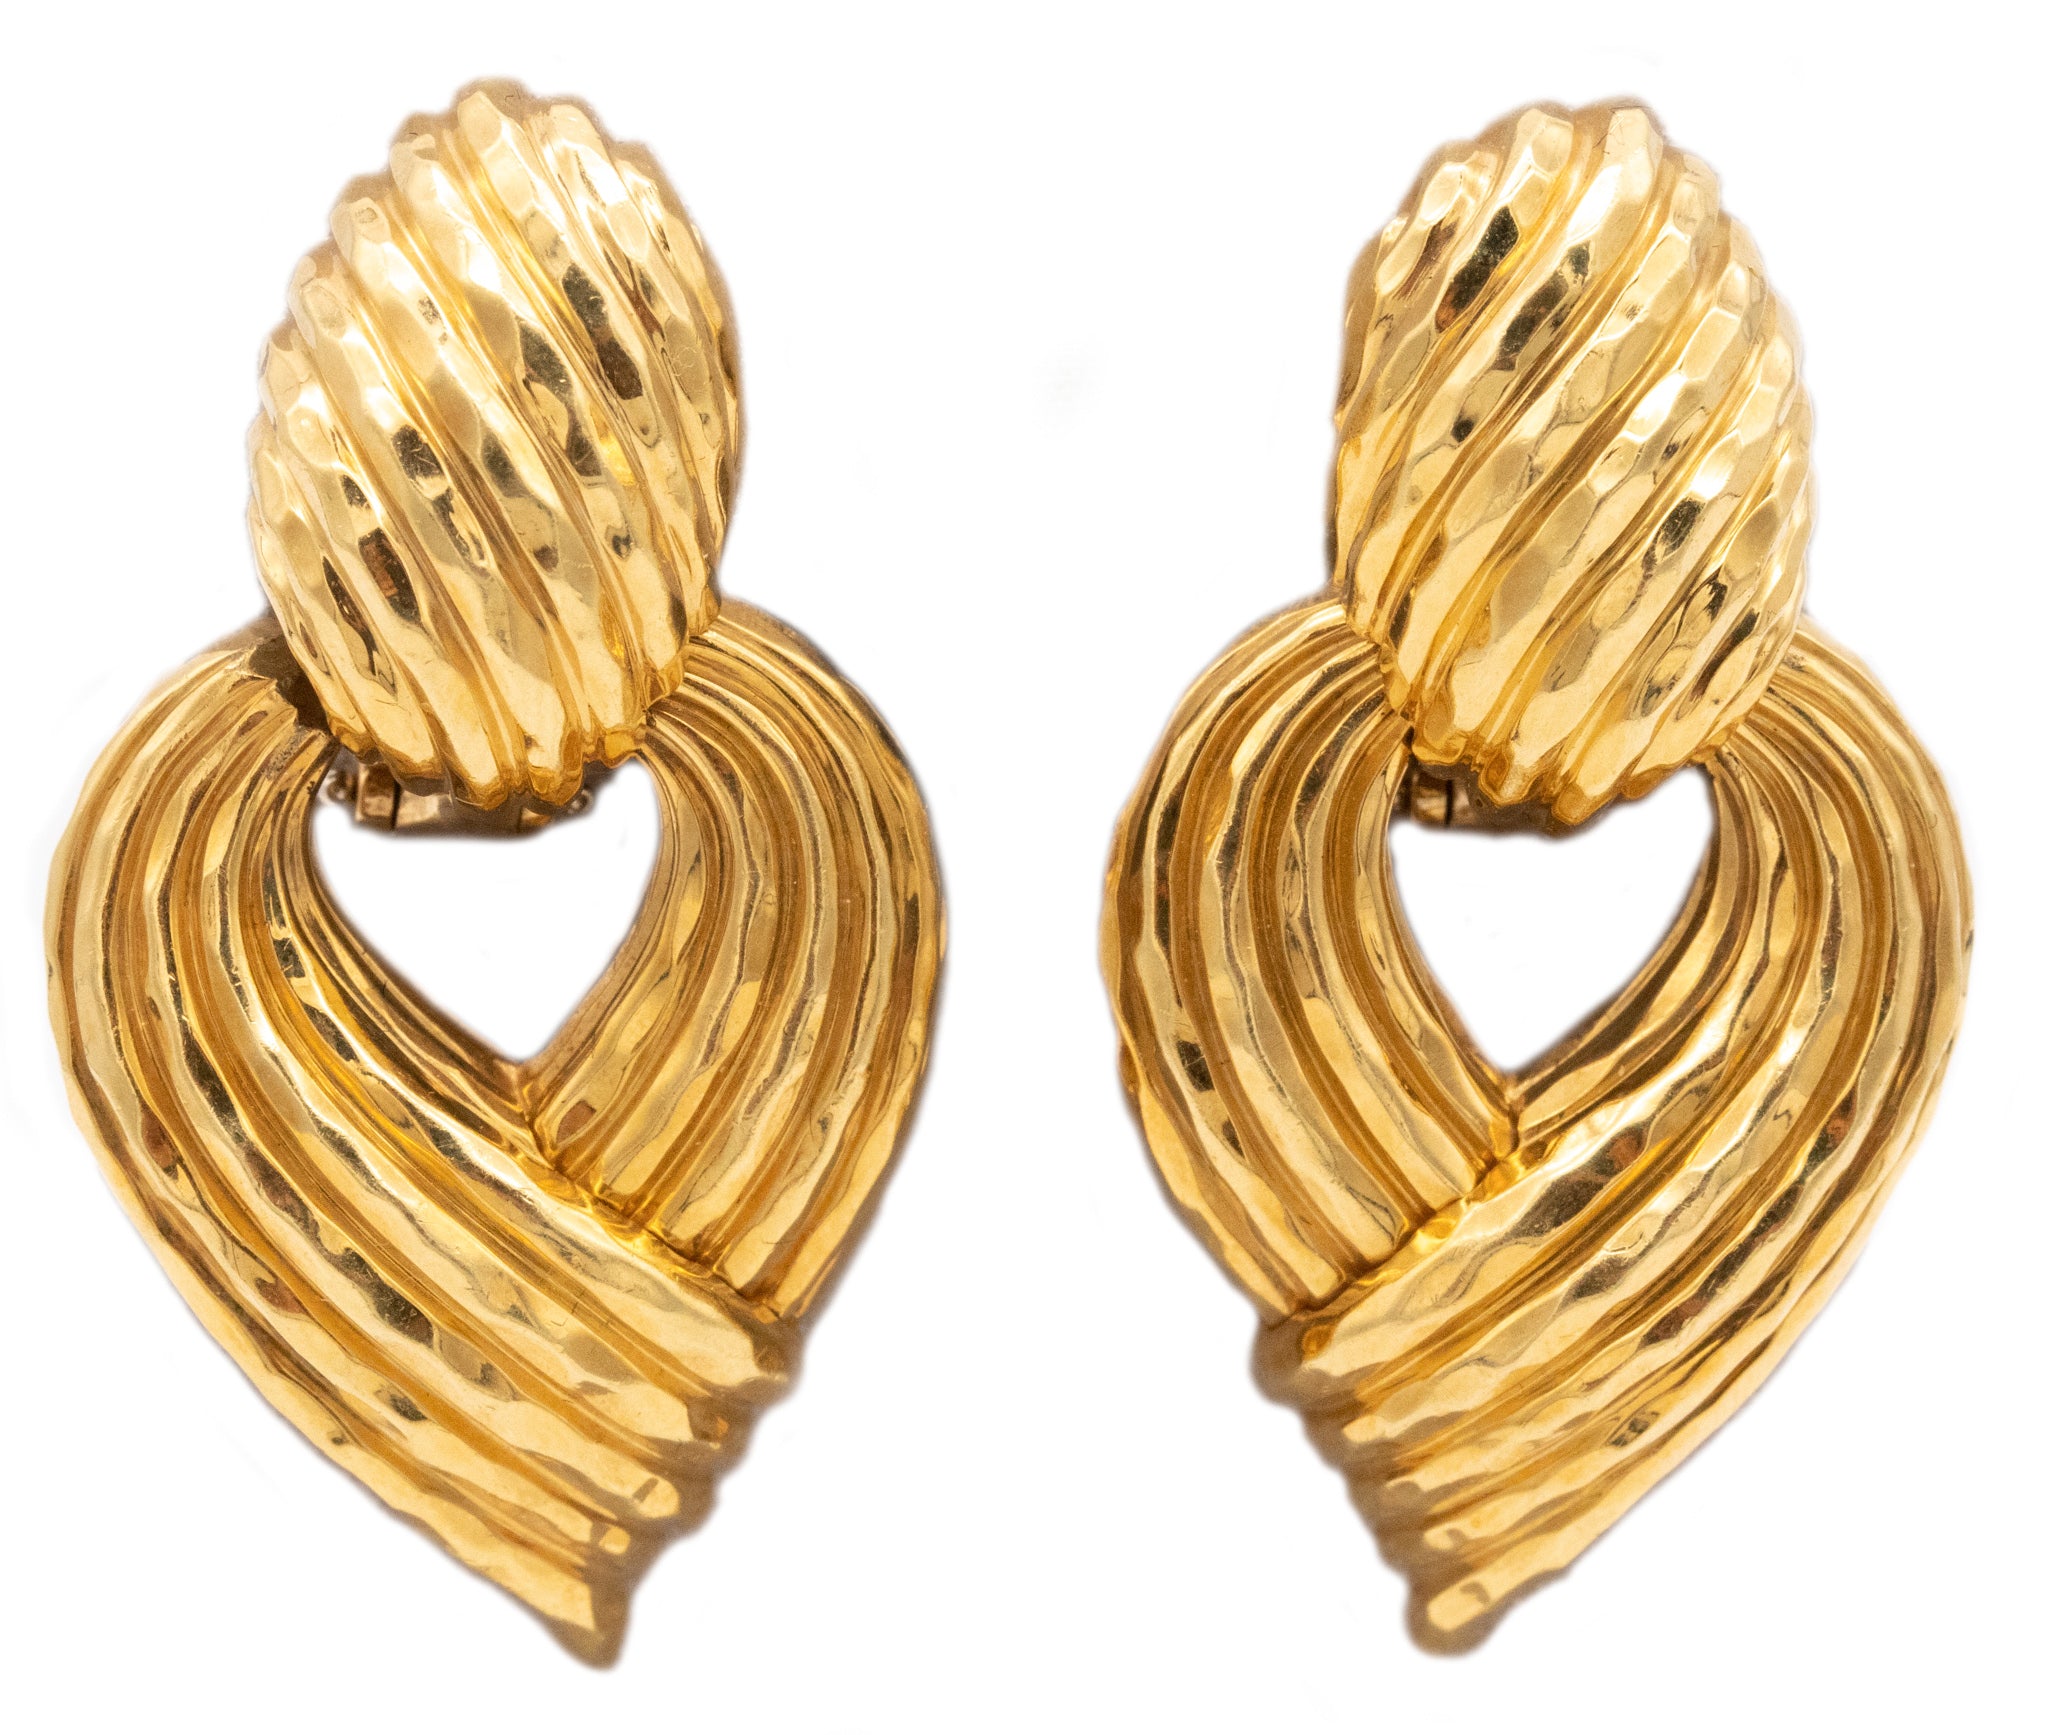 HENRY DUNAY 18 KT YELLOW GOLD MOVABLE TEXTURED EARRINGS